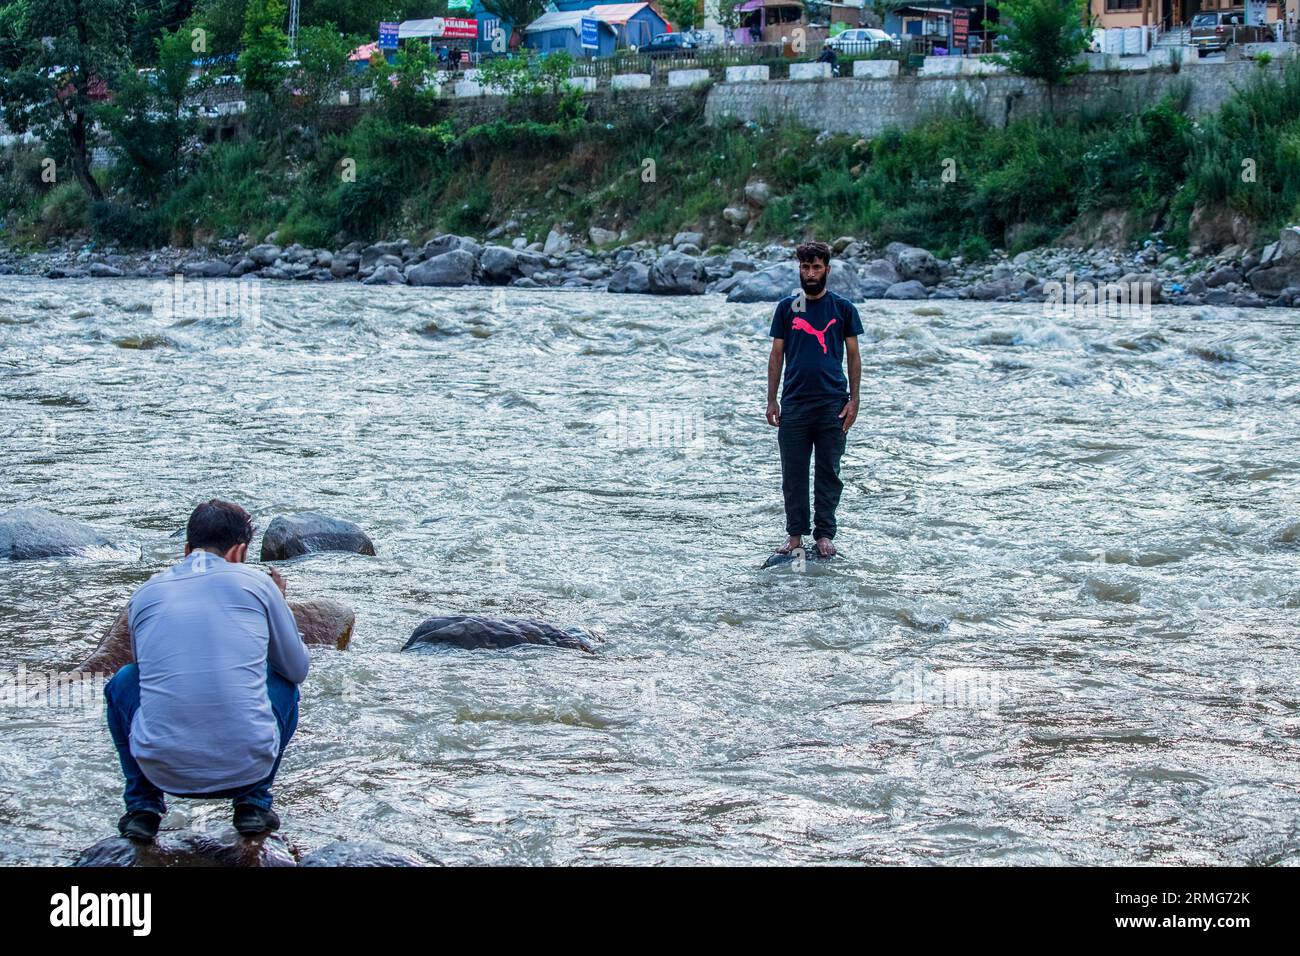 Keran Kupwara, India. 24th Aug, 2023. A local visitor seen taking photos of his friend on the banks of Neelam river or Kishan Ganga that has divided Kashmir into two parts controlled by nuclear rivals India and Pakistan. The river acts as a disputed line of control and flows through a village called Keran from both sides which is located on the northern side of Indian Kashmir's Border district Kupwara some 150kms from Srinagar and 93kms from Muzaffarabad, in the Pakistan side of Kashmir. (Photo by Faisal Bashir/SOPA Images/Sipa USA) Credit: Sipa USA/Alamy Live News Stock Photo